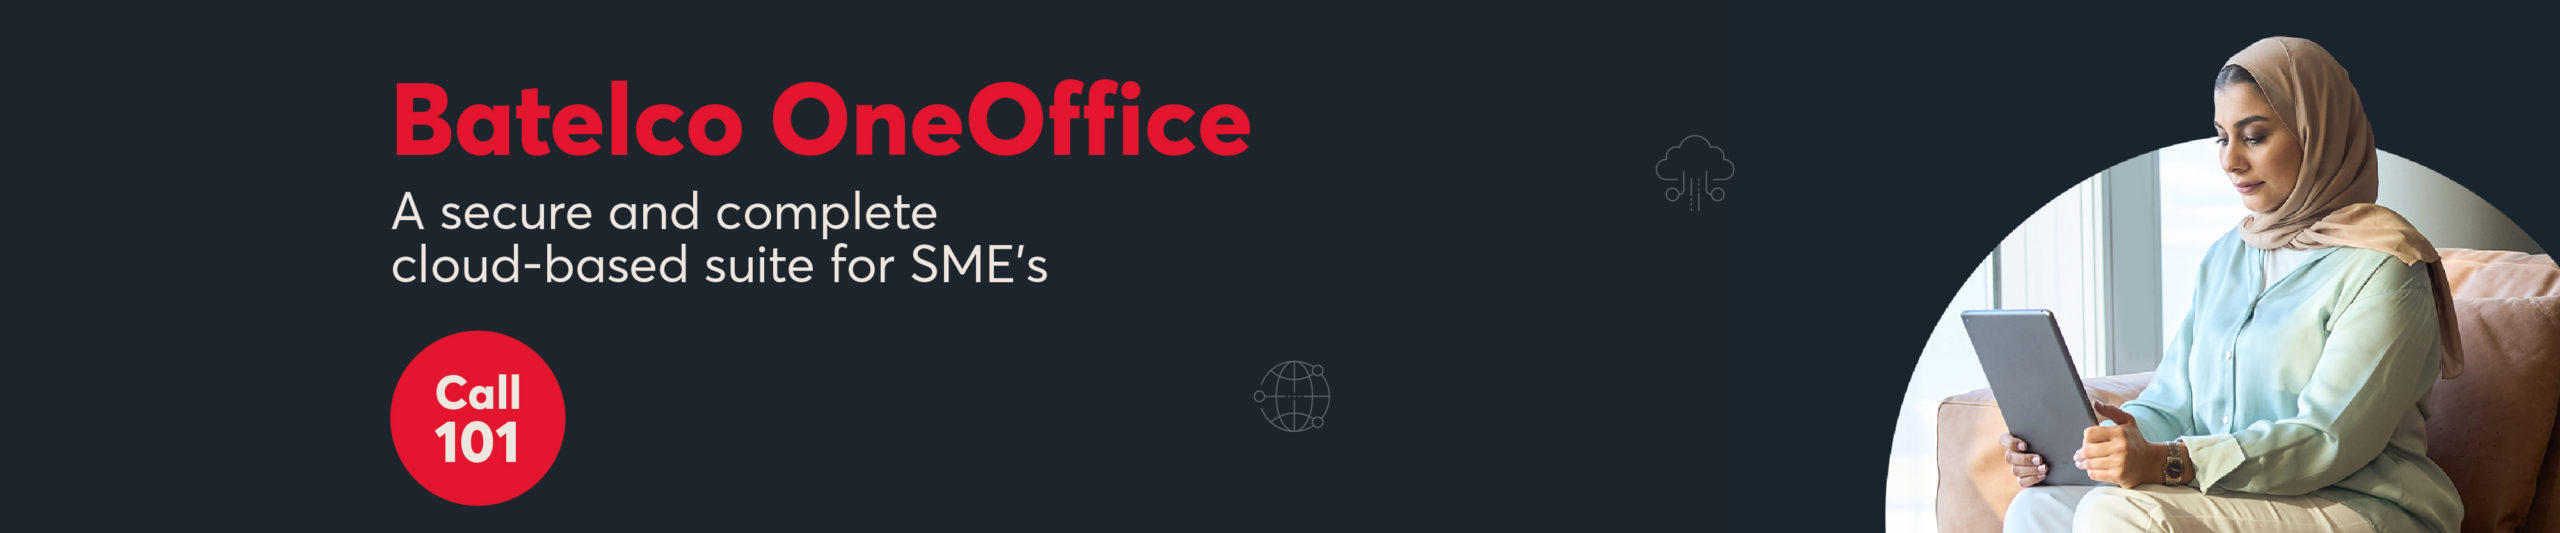 Batelco OneOffice